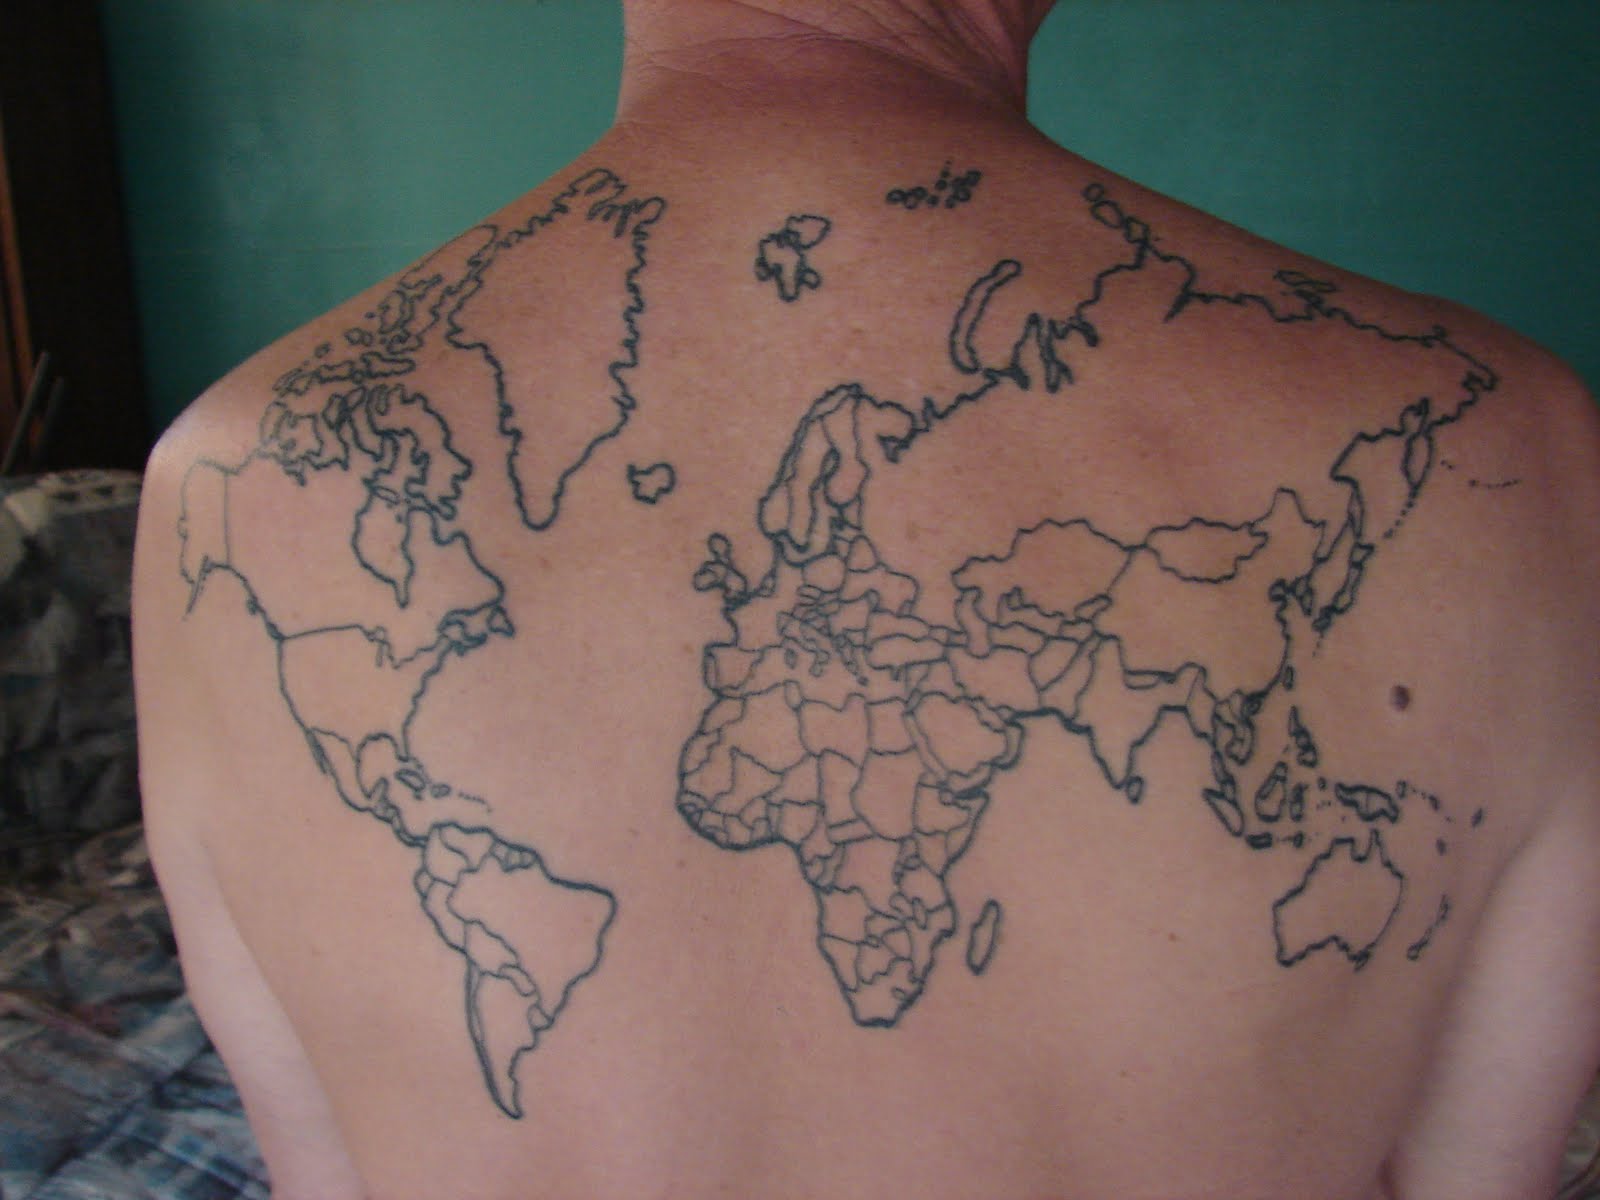 MOST CRAZIEST TATTOOS IN THE WORLD | Your Tour Info